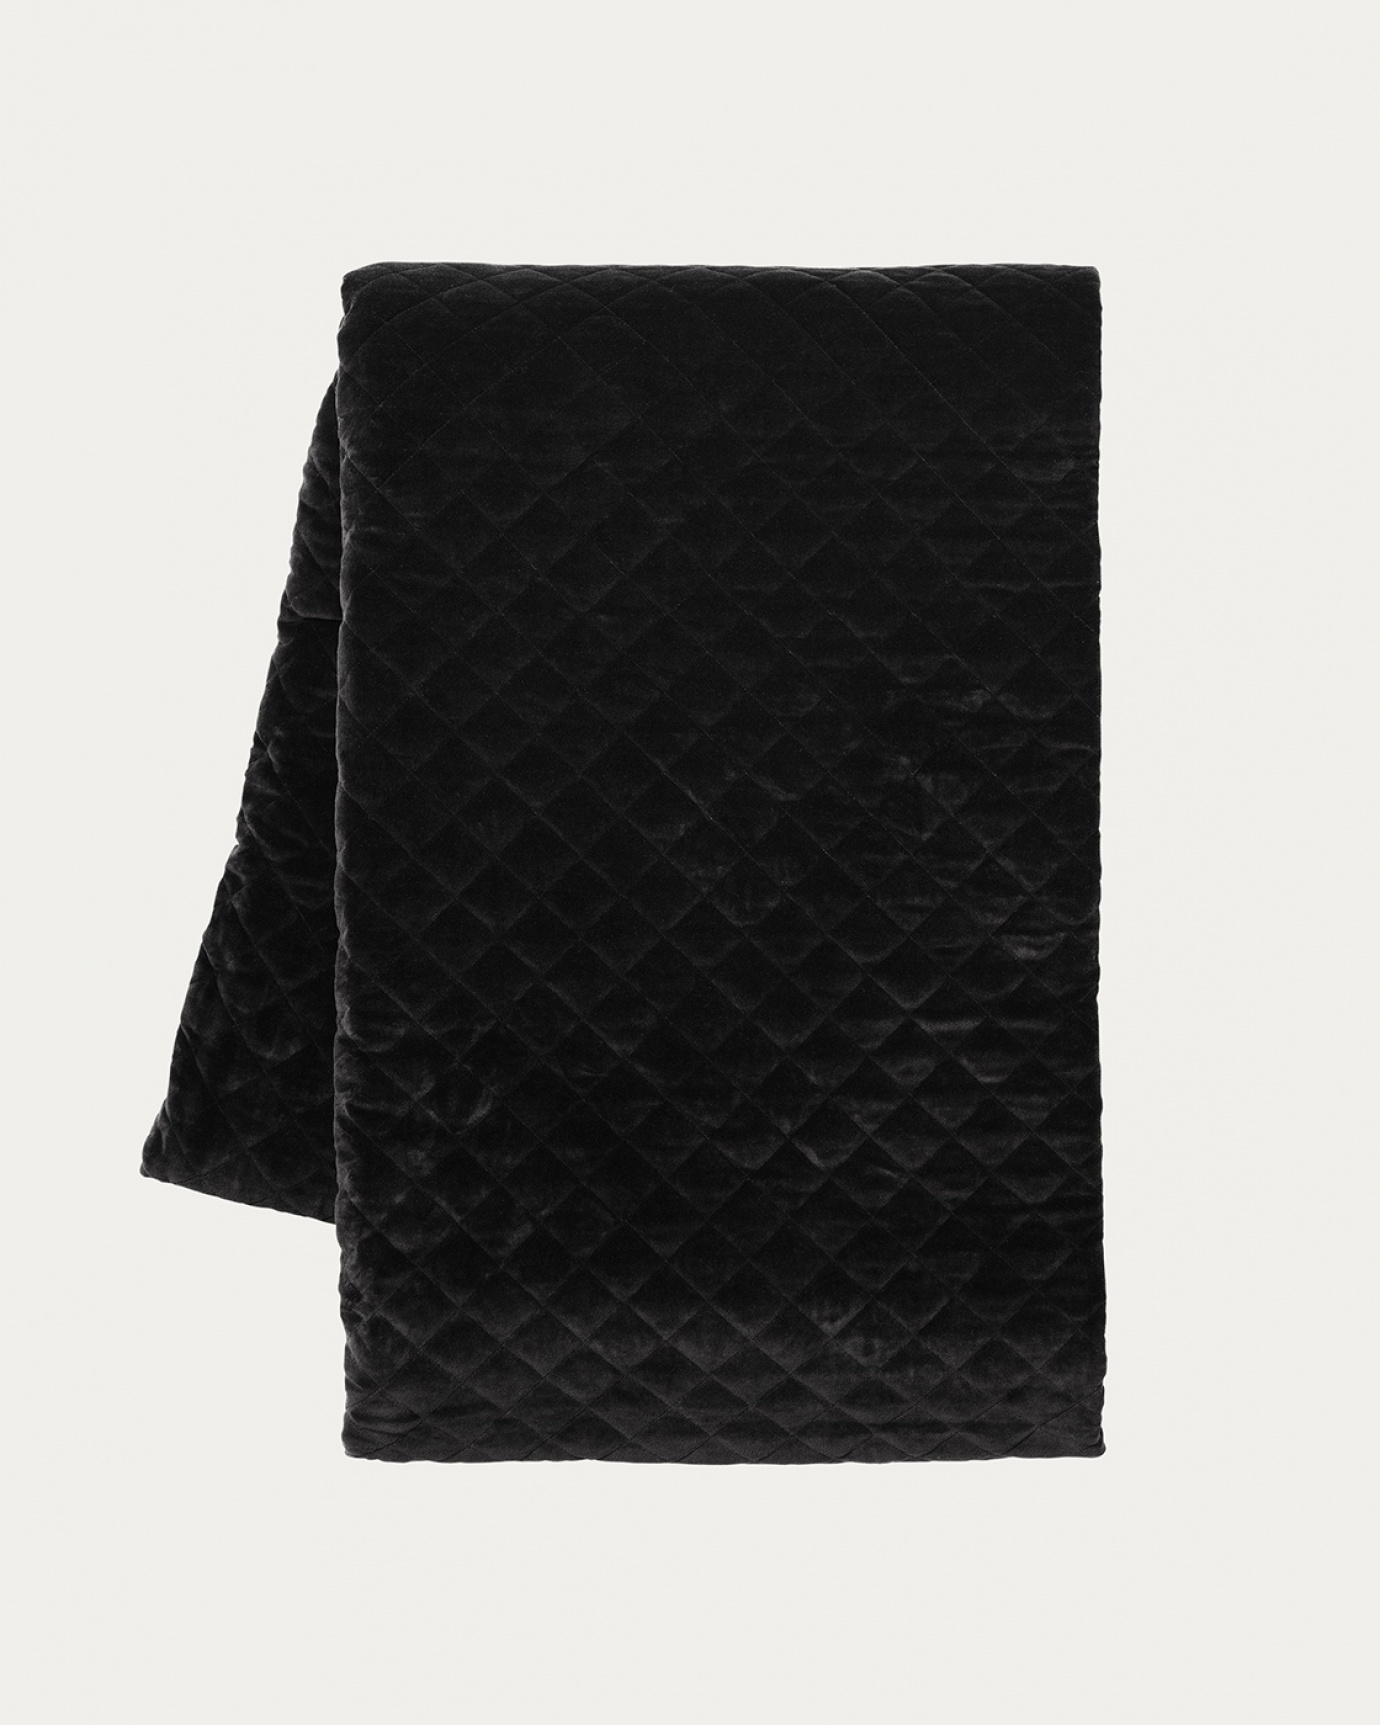 Product image black PICCOLO bedspread in soft organic cotton velvet for single bed from LINUM DESIGN. Size 170x260 cm.